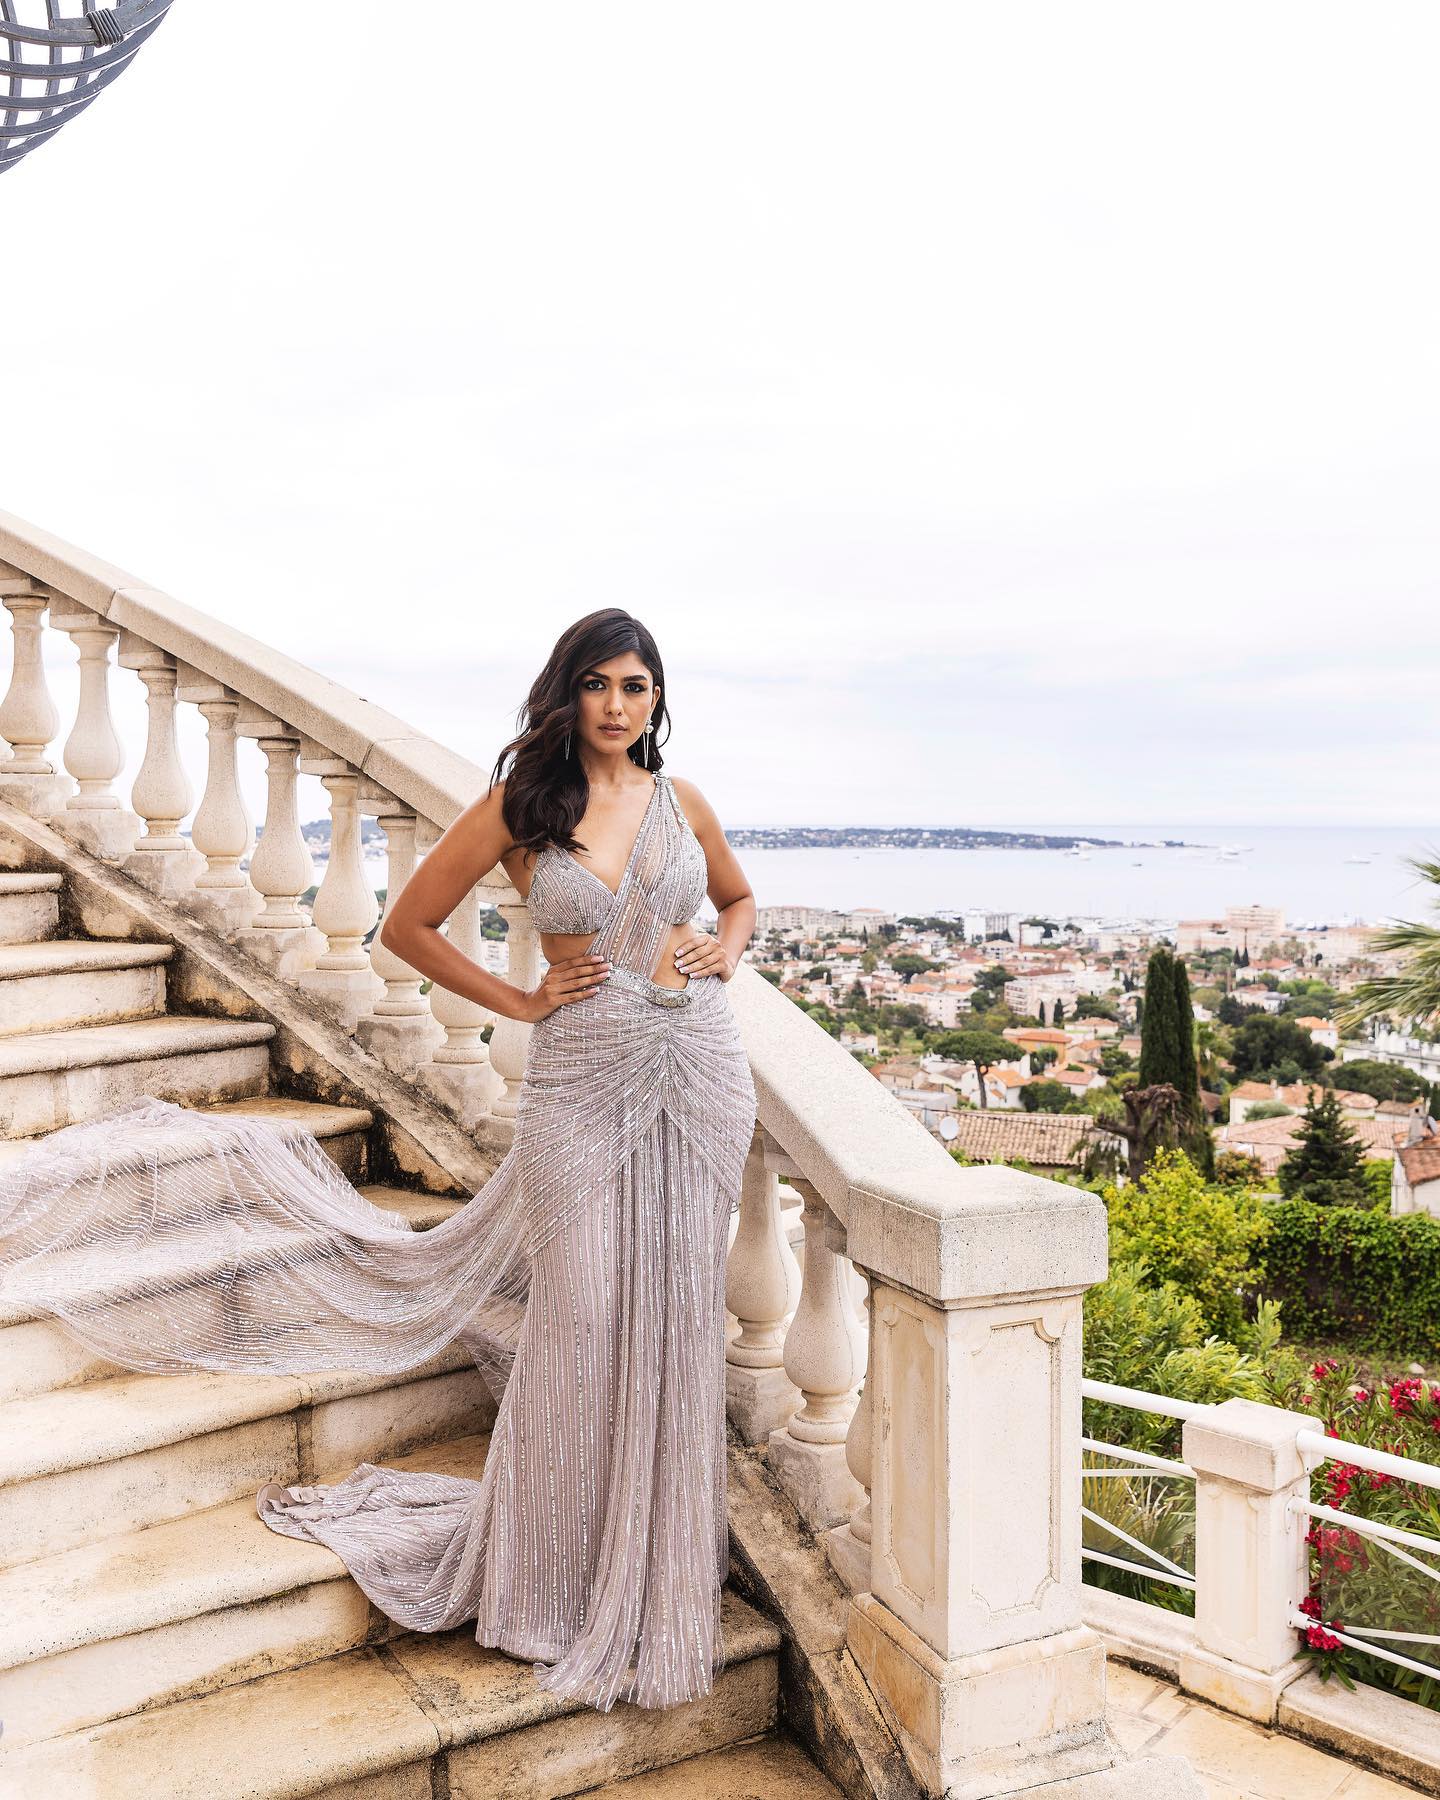 Bollywood Celebrities Who Slayed At The Cannes 2023 Red Carpet